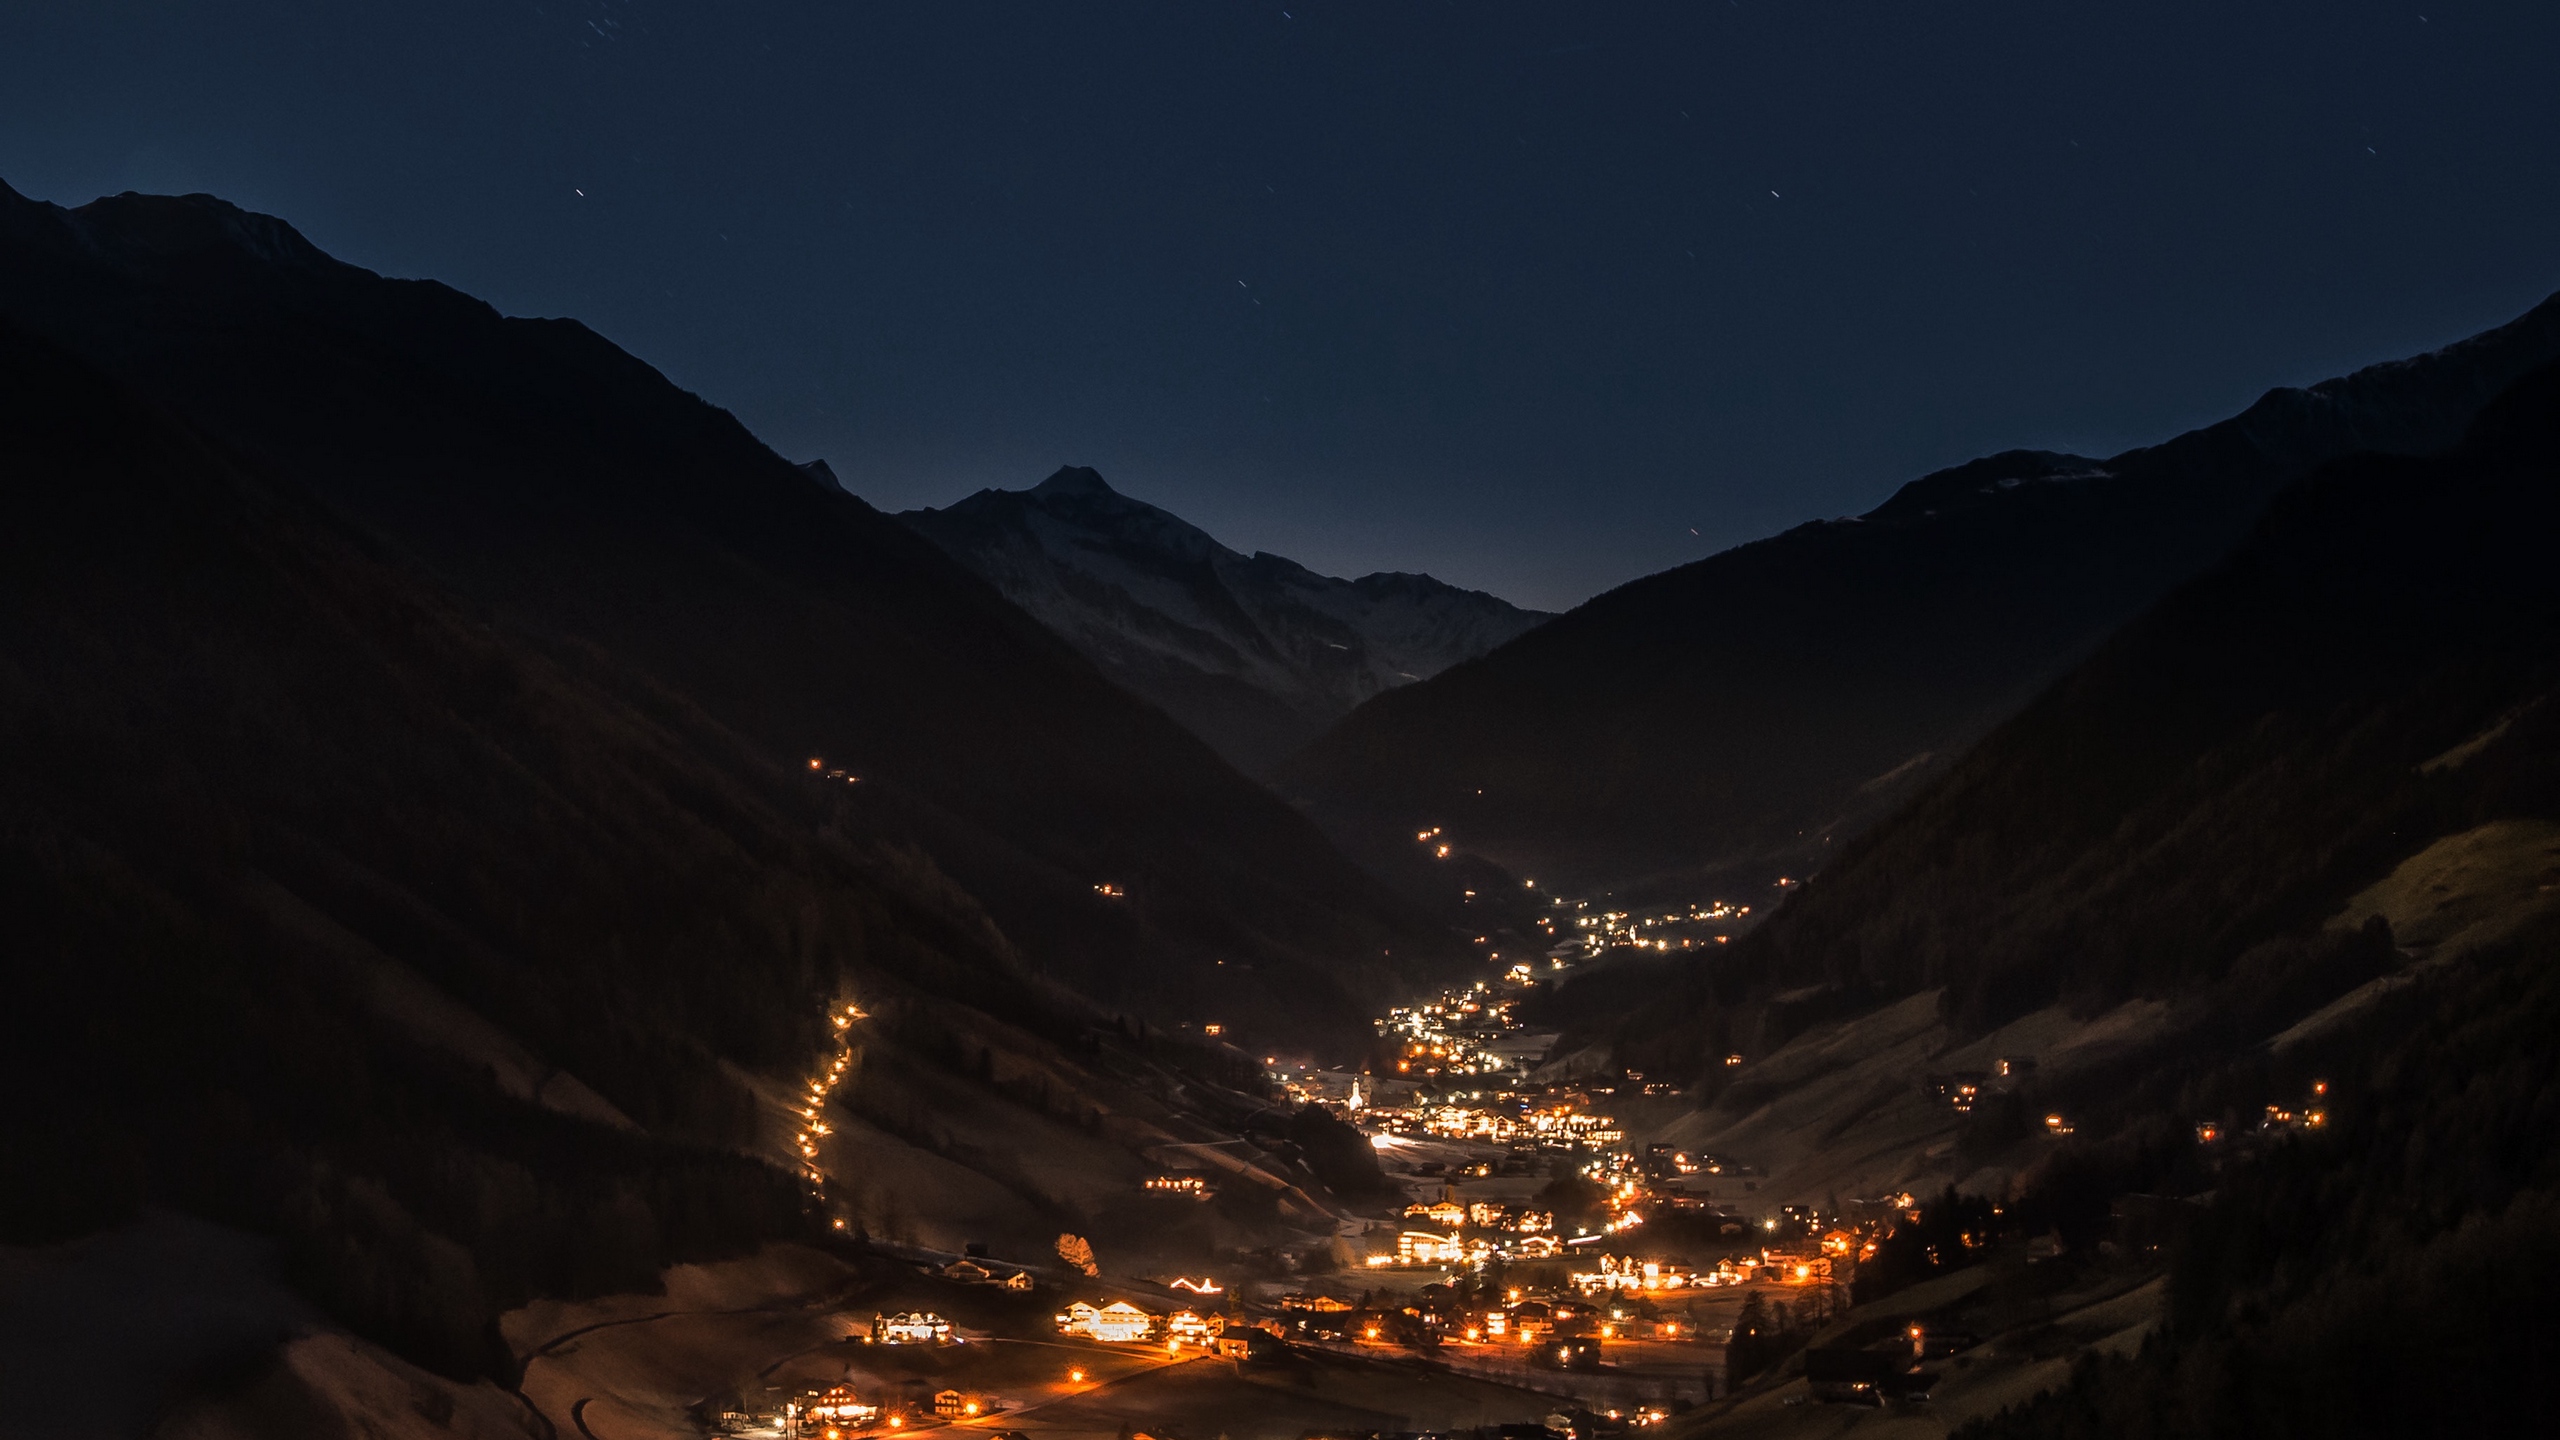 General 2560x1440 mountains night sky valley landscape town city lights